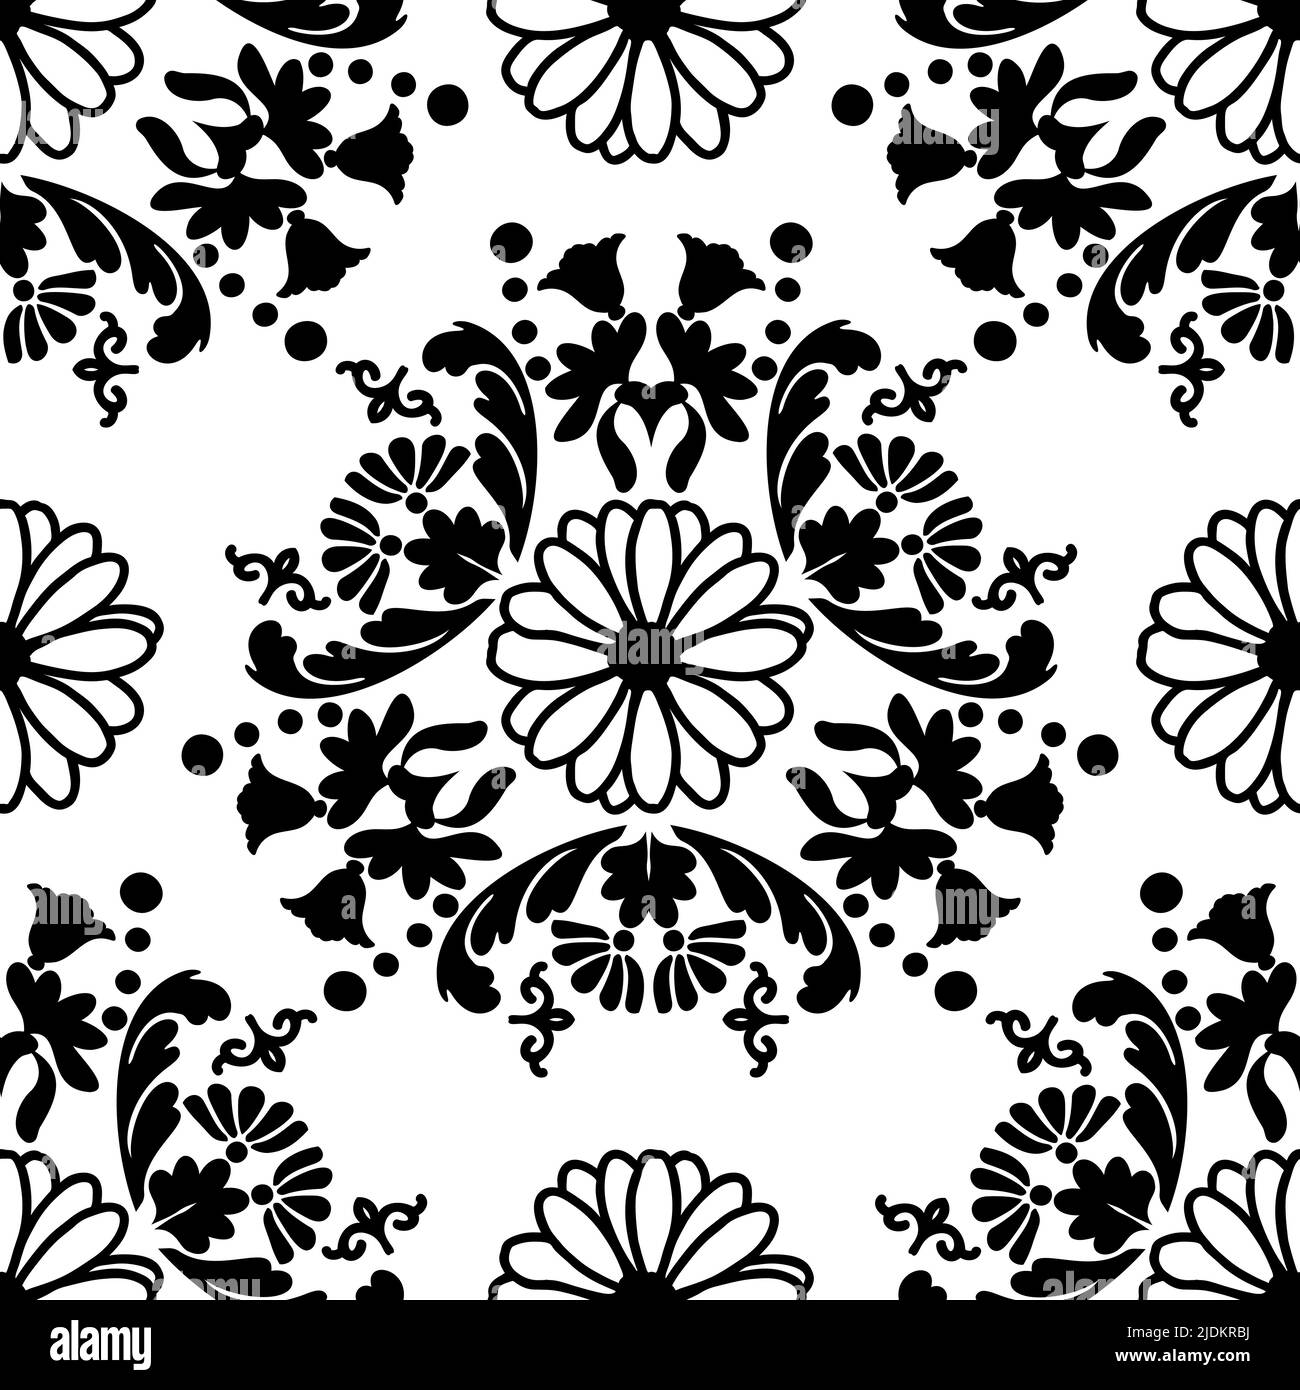 Fashioned floral pattern. Vintage black ornament with flowers. Vector floral pattern for fabric, ceramic tile or wrapping paper design. Stock Vector